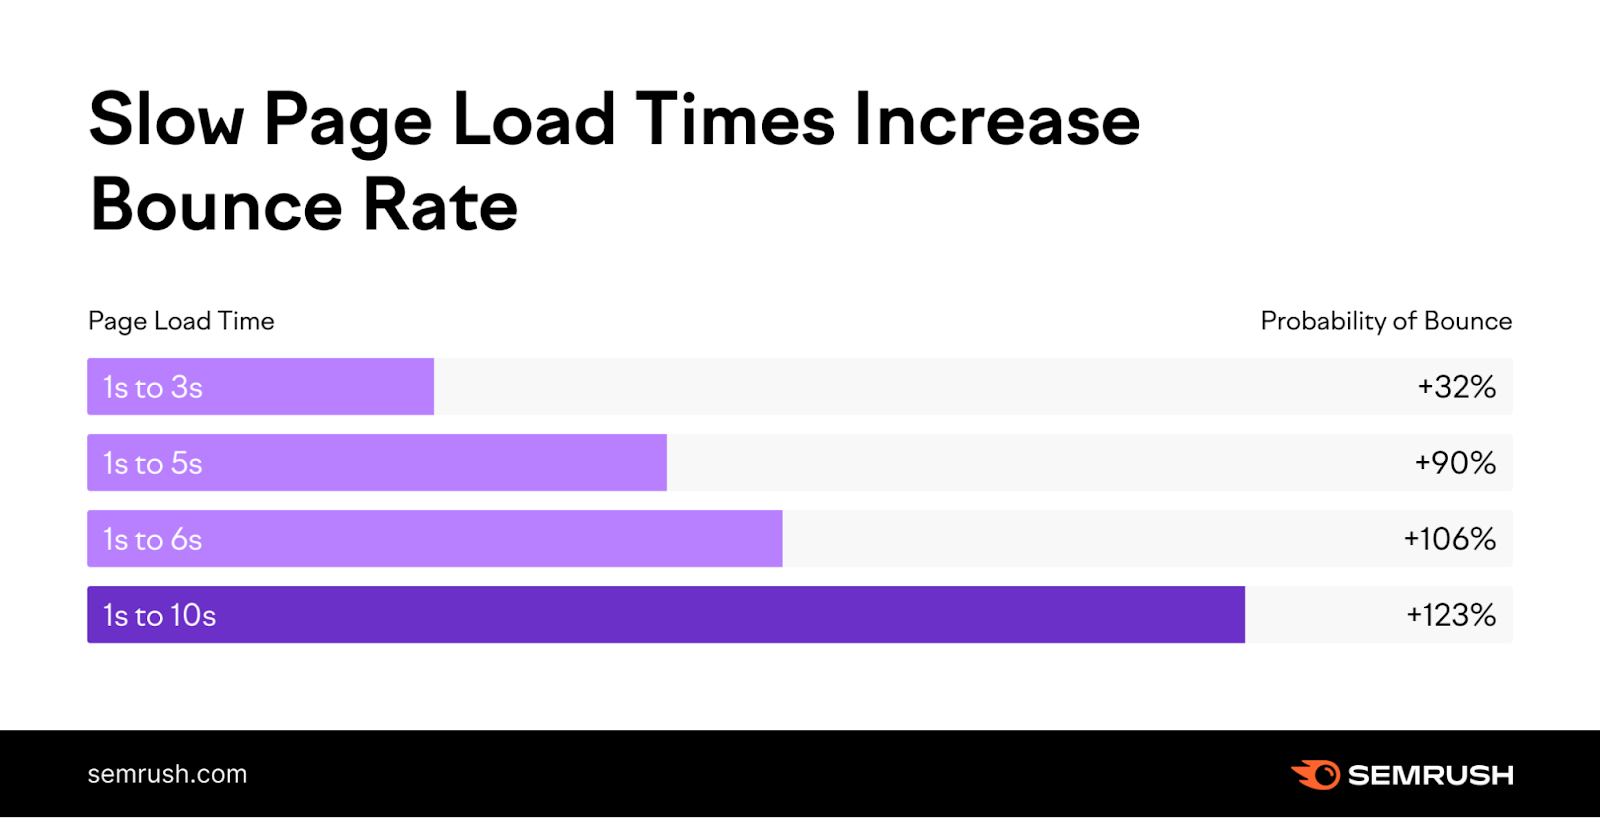 A graph showing how slow page load times increase bounce rate